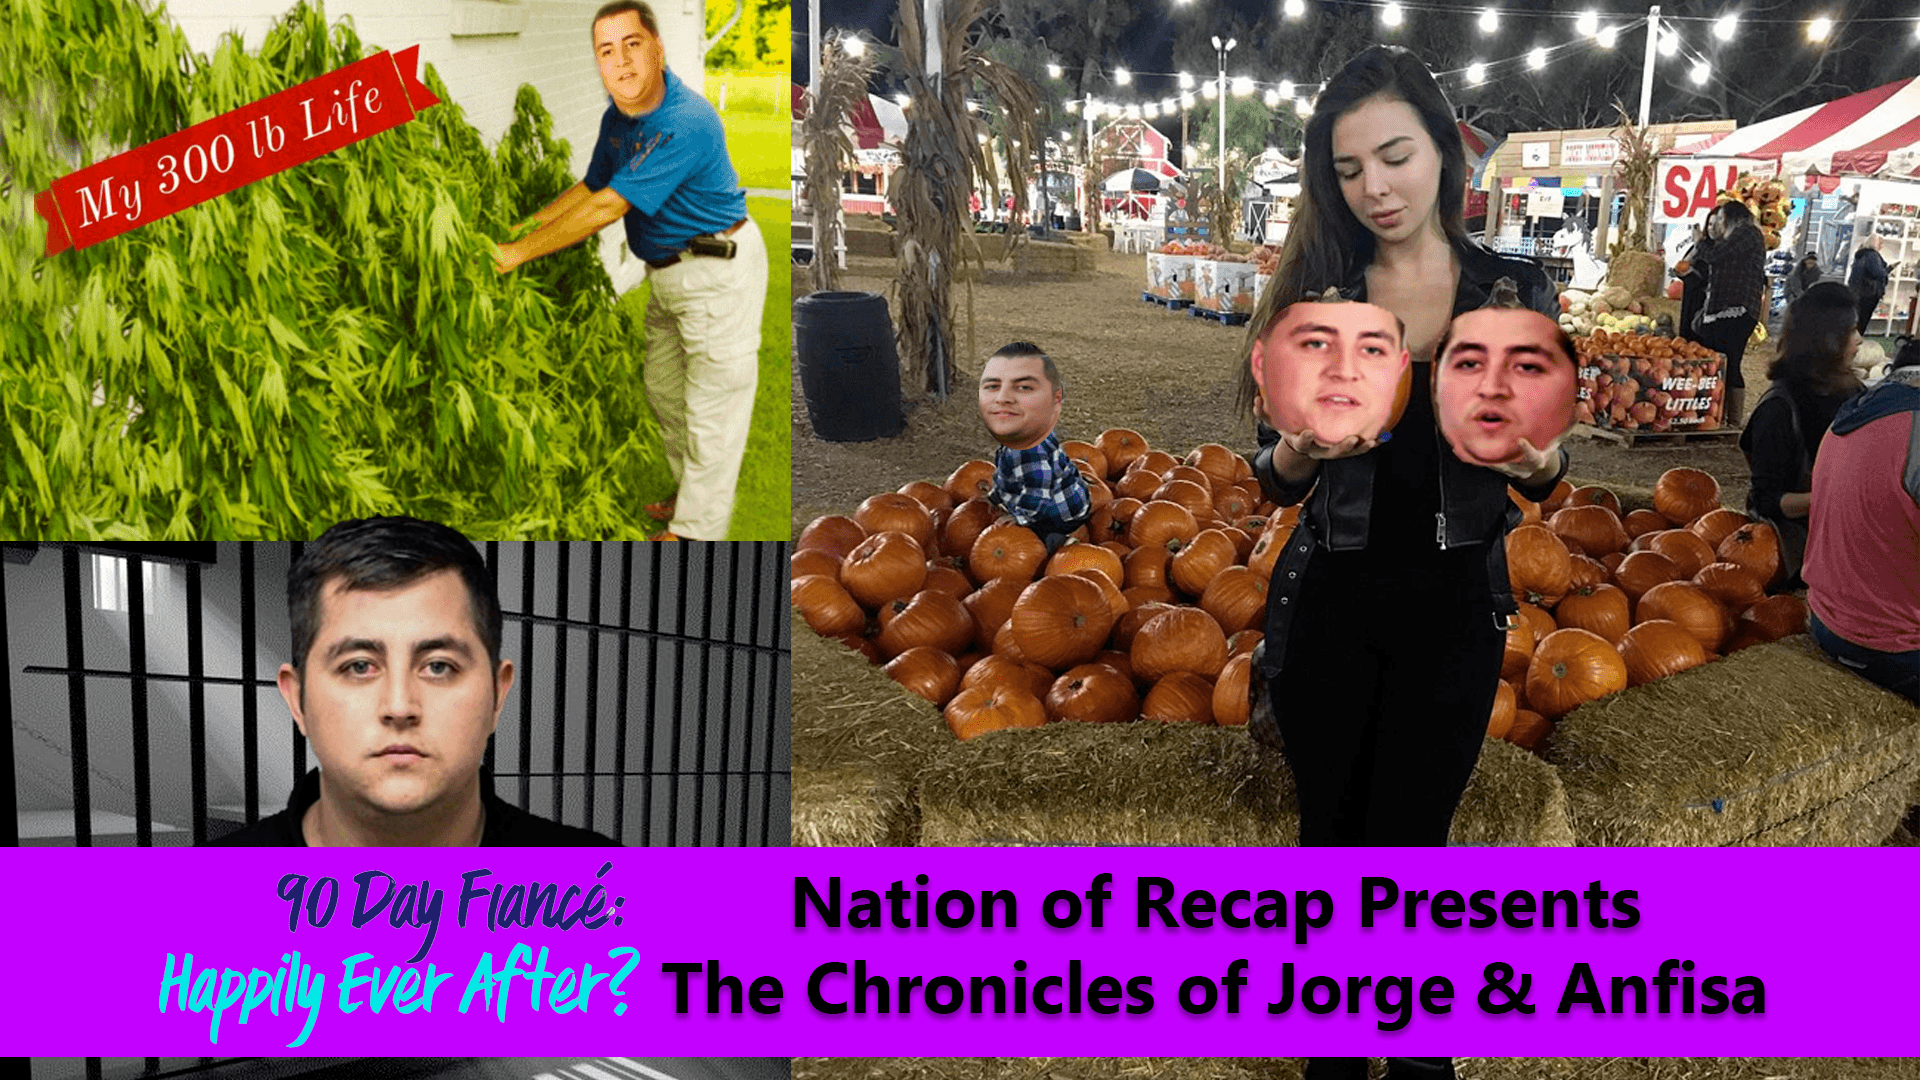 90 Day Fiance Happily Ever After? Jorge and Anfisa